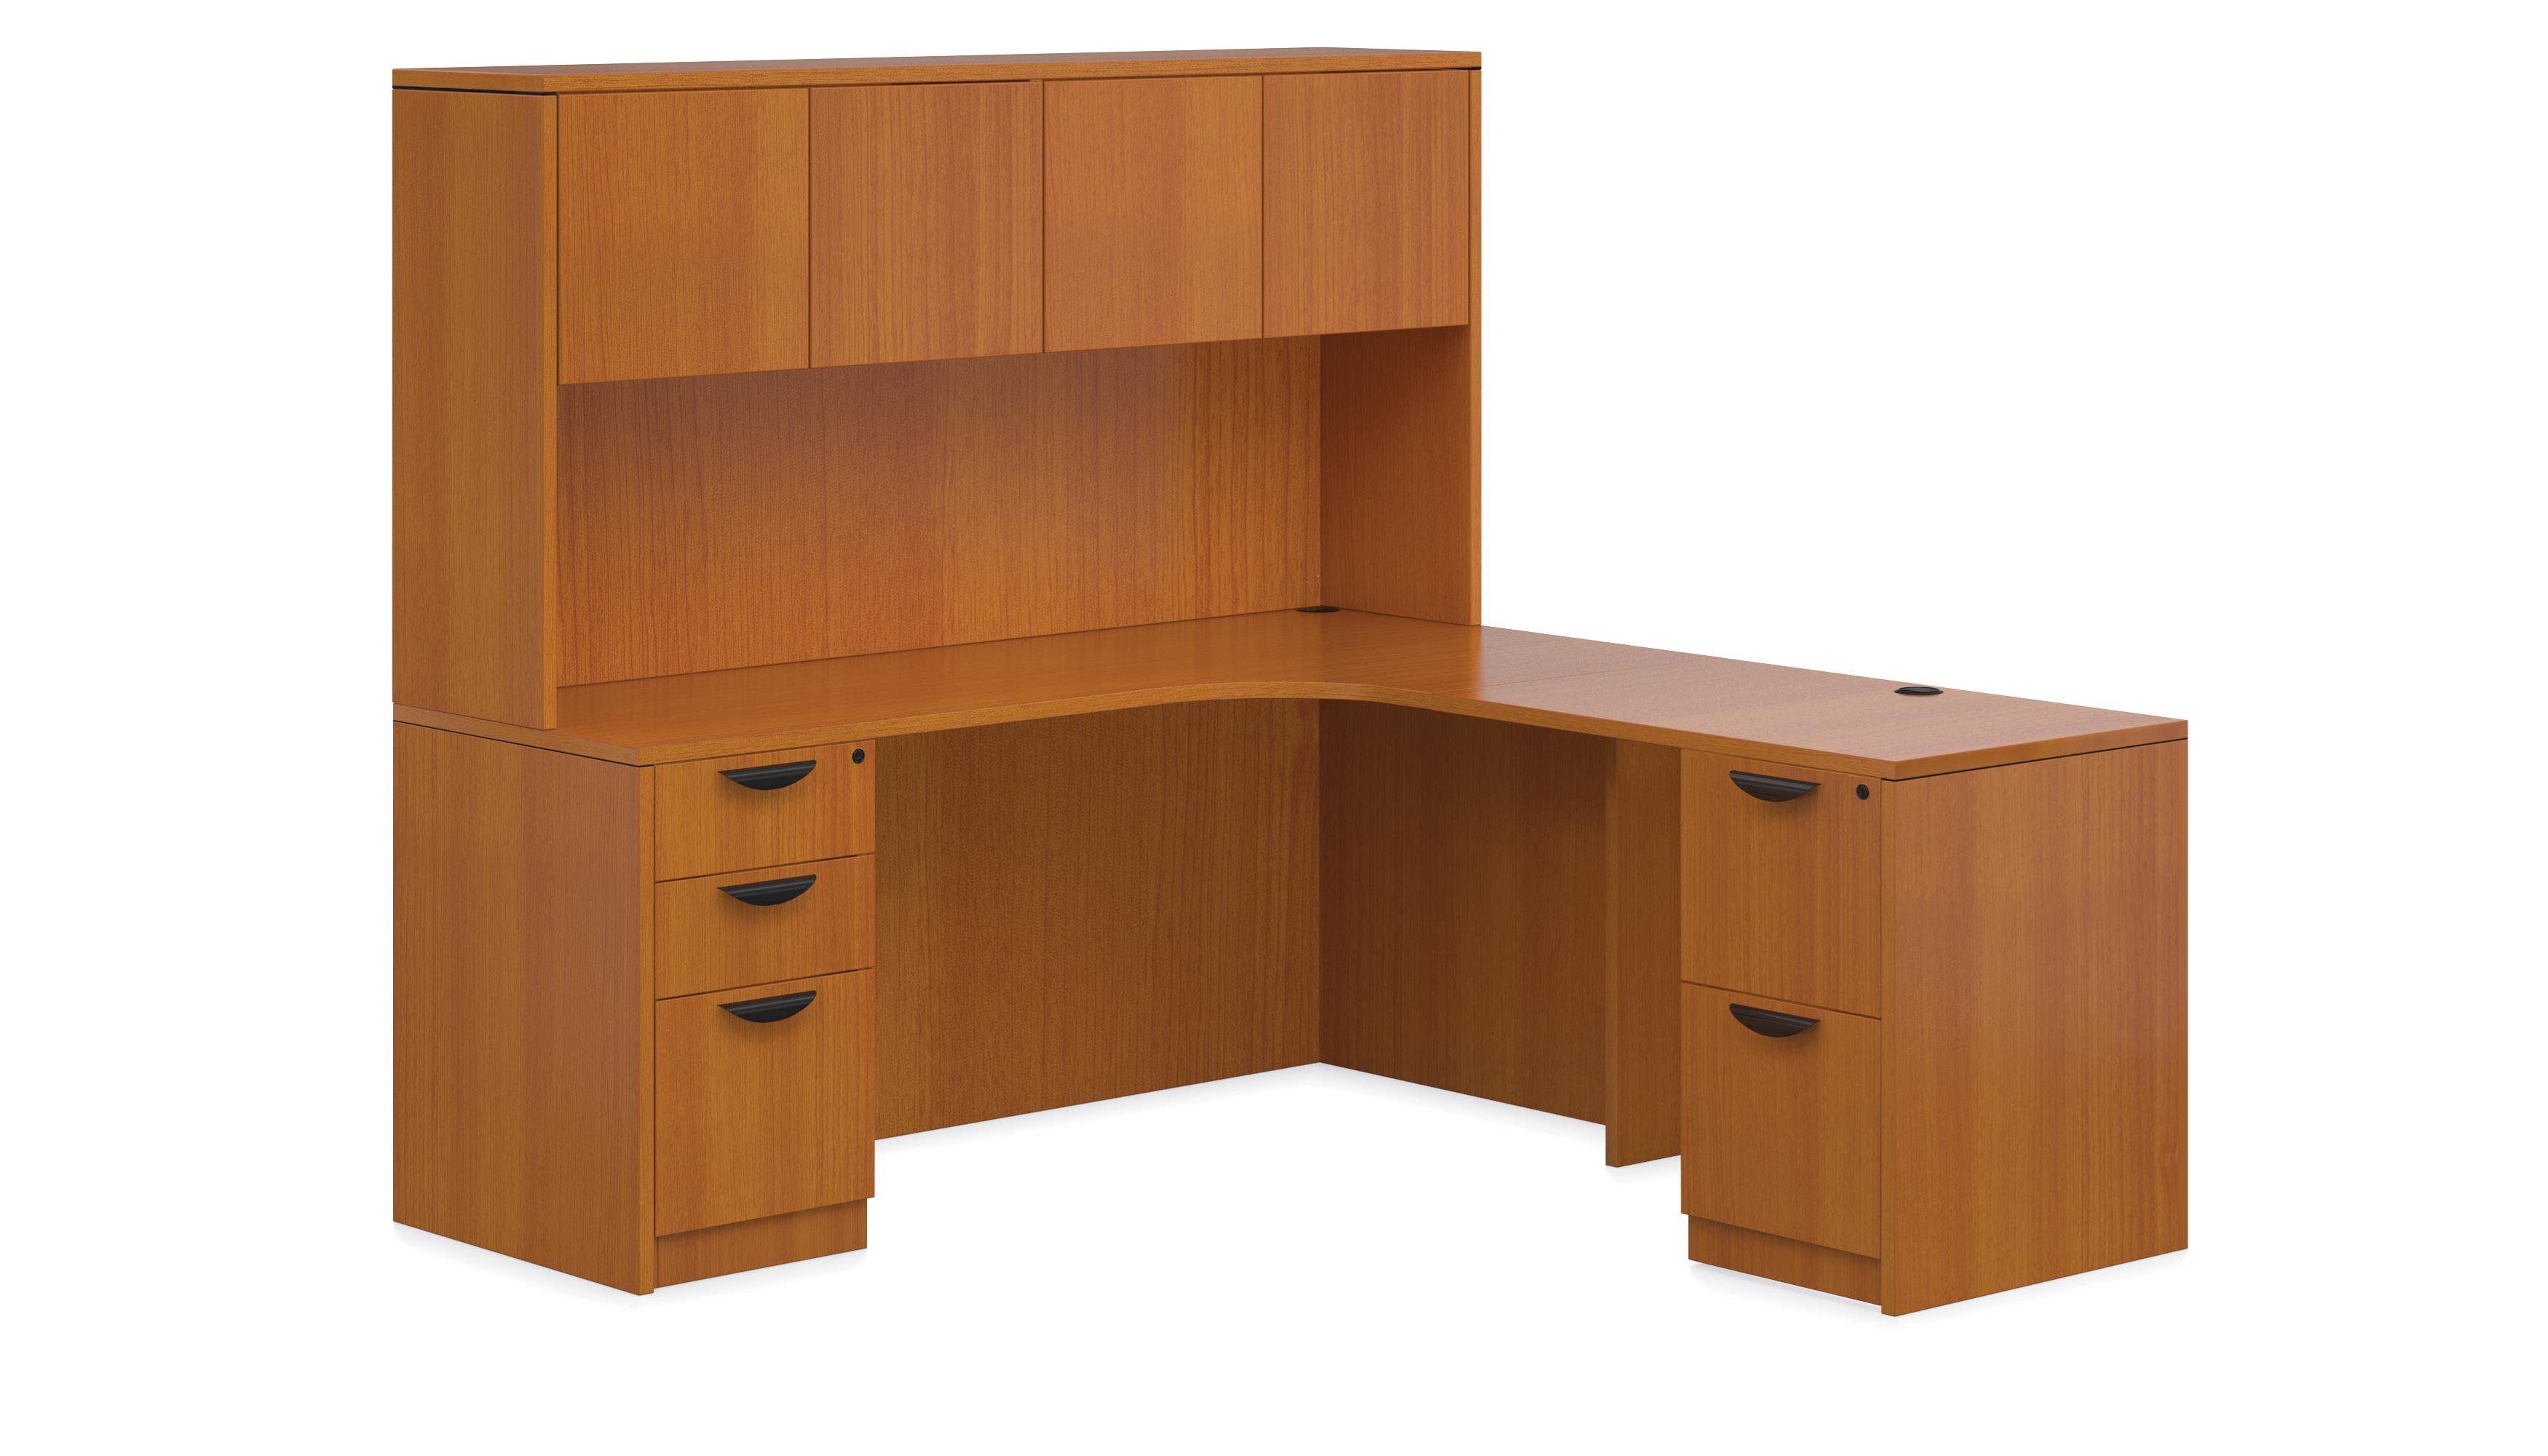 Offices To Go L Shaped Desk W A Credenza With Corner Extension W A